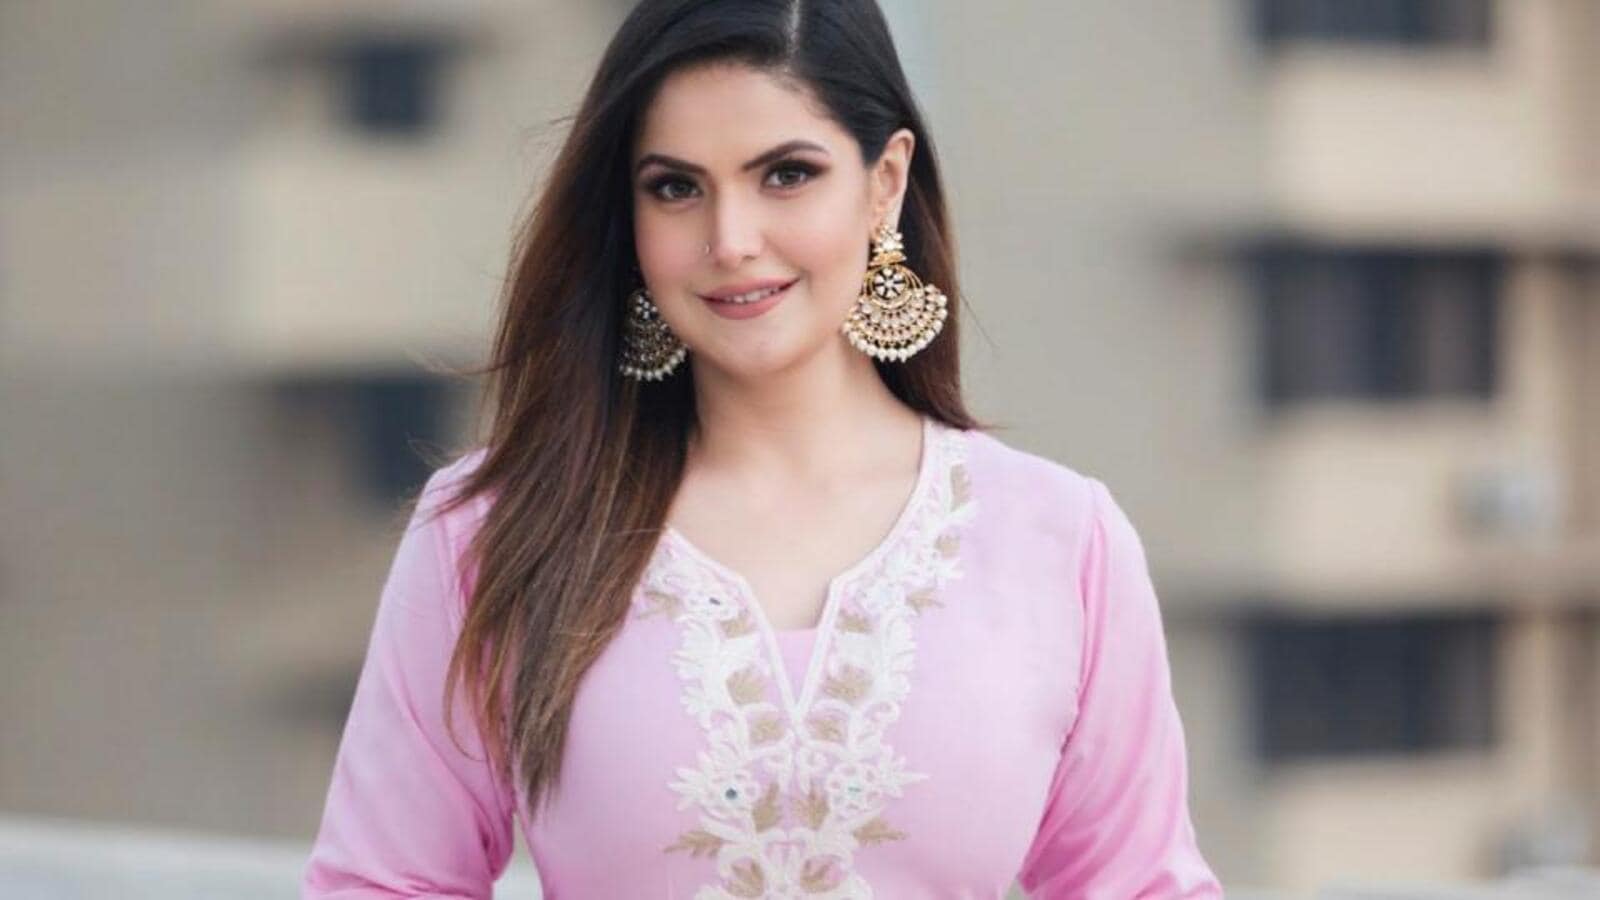 Zareen Khan I am much more than my face and body; hope people give me a chance and not judge me Bollywood image image